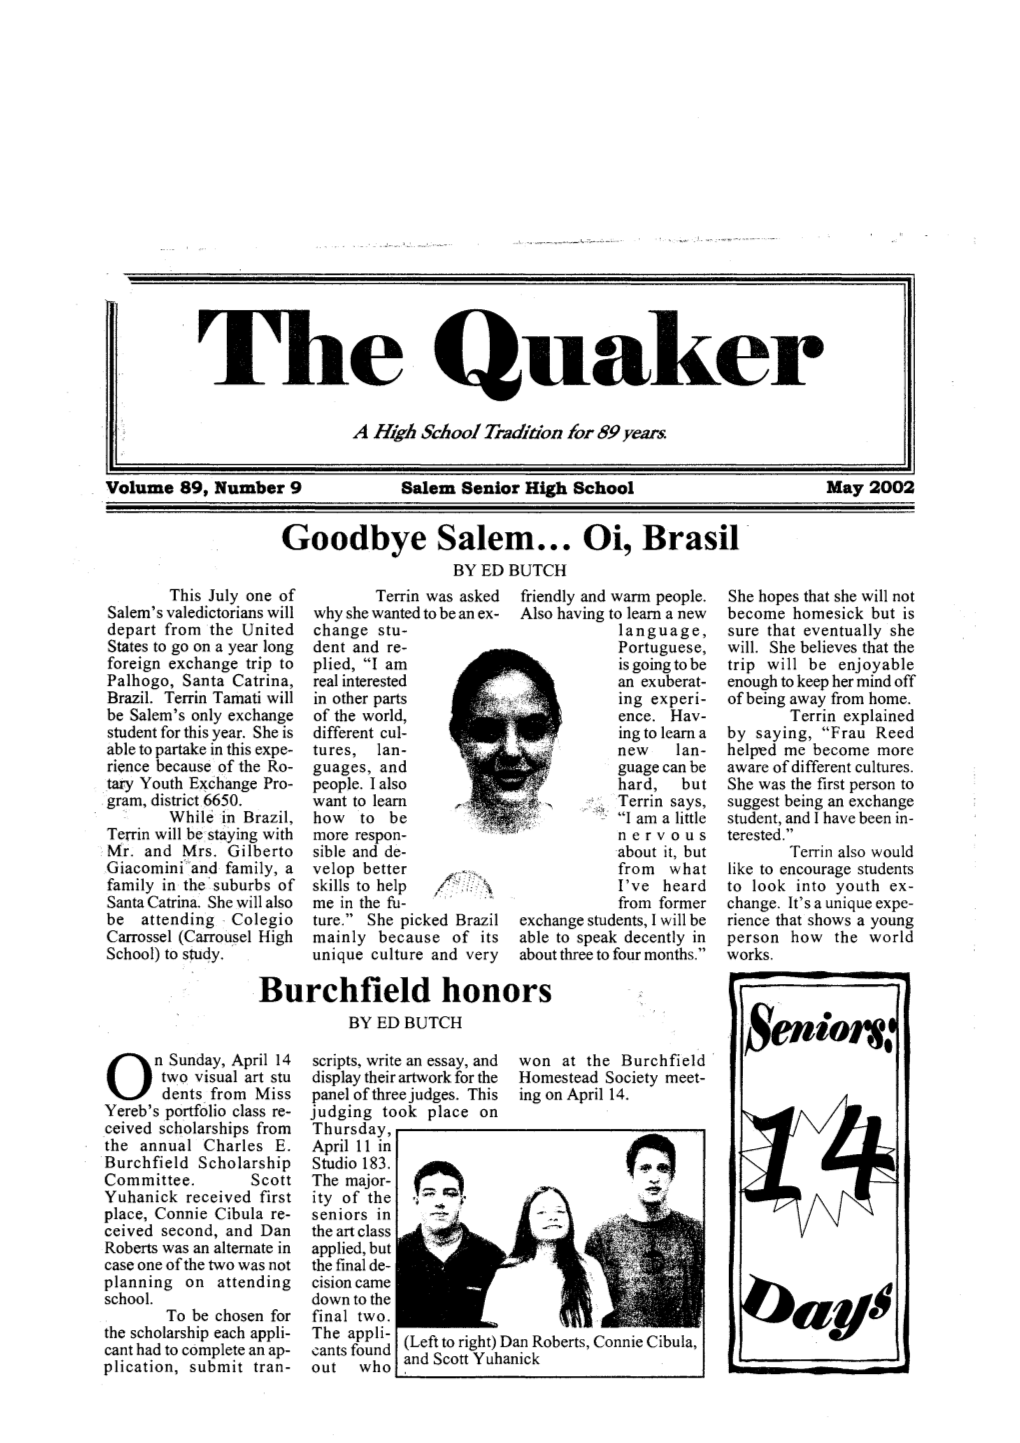 Equaker a High School Tradition for 89 Years